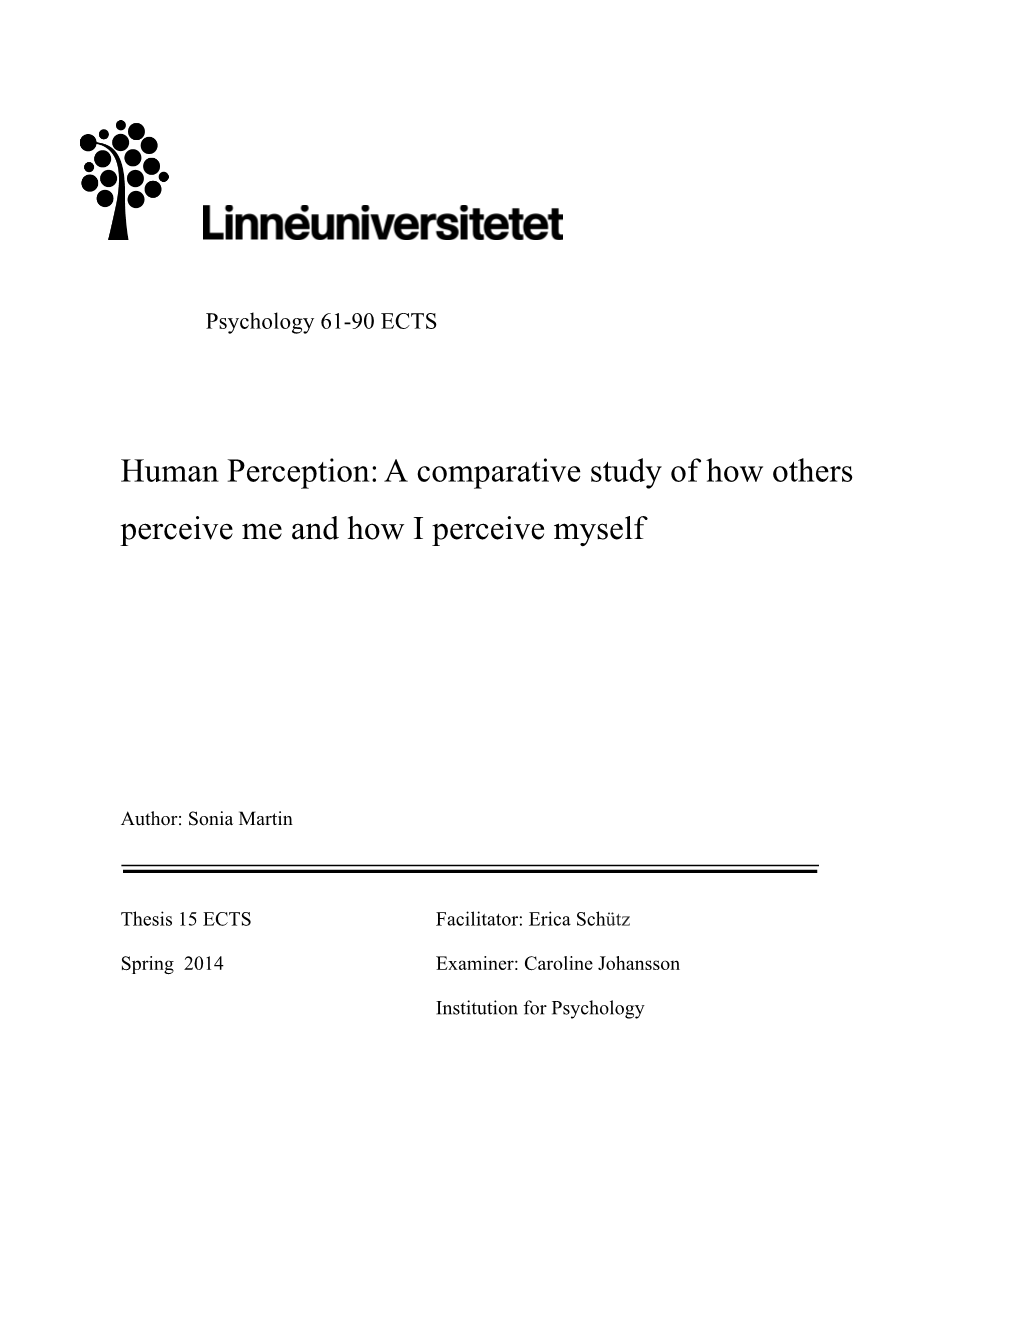 Human Perception:A Comparative Study of How Others Perceive Me